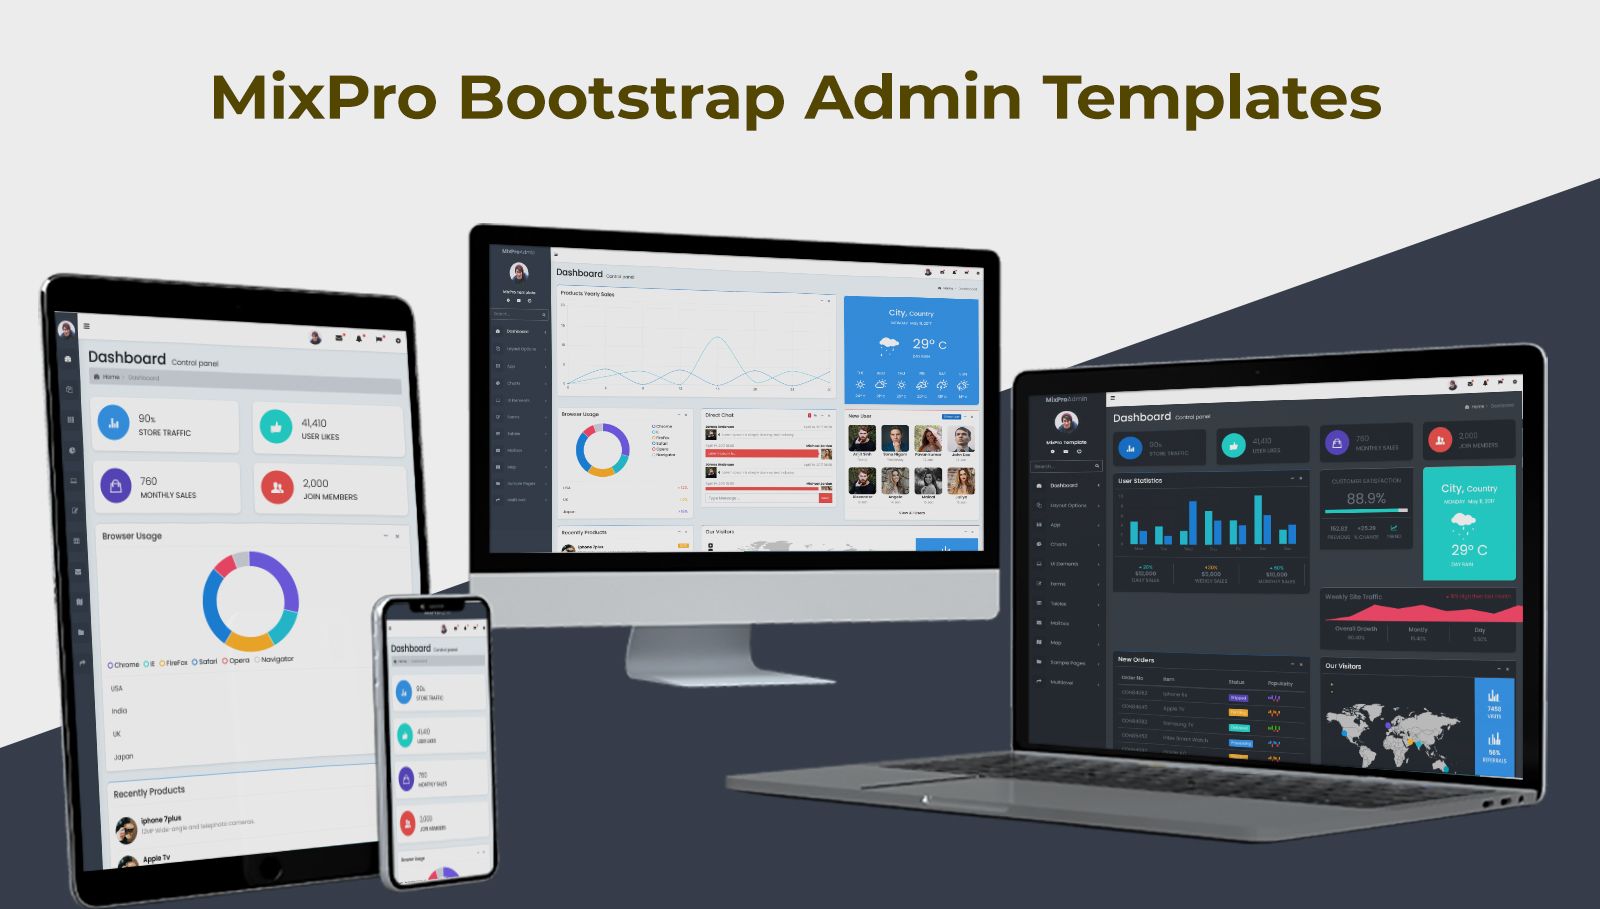 Why Should You Be Using Admin Templates?